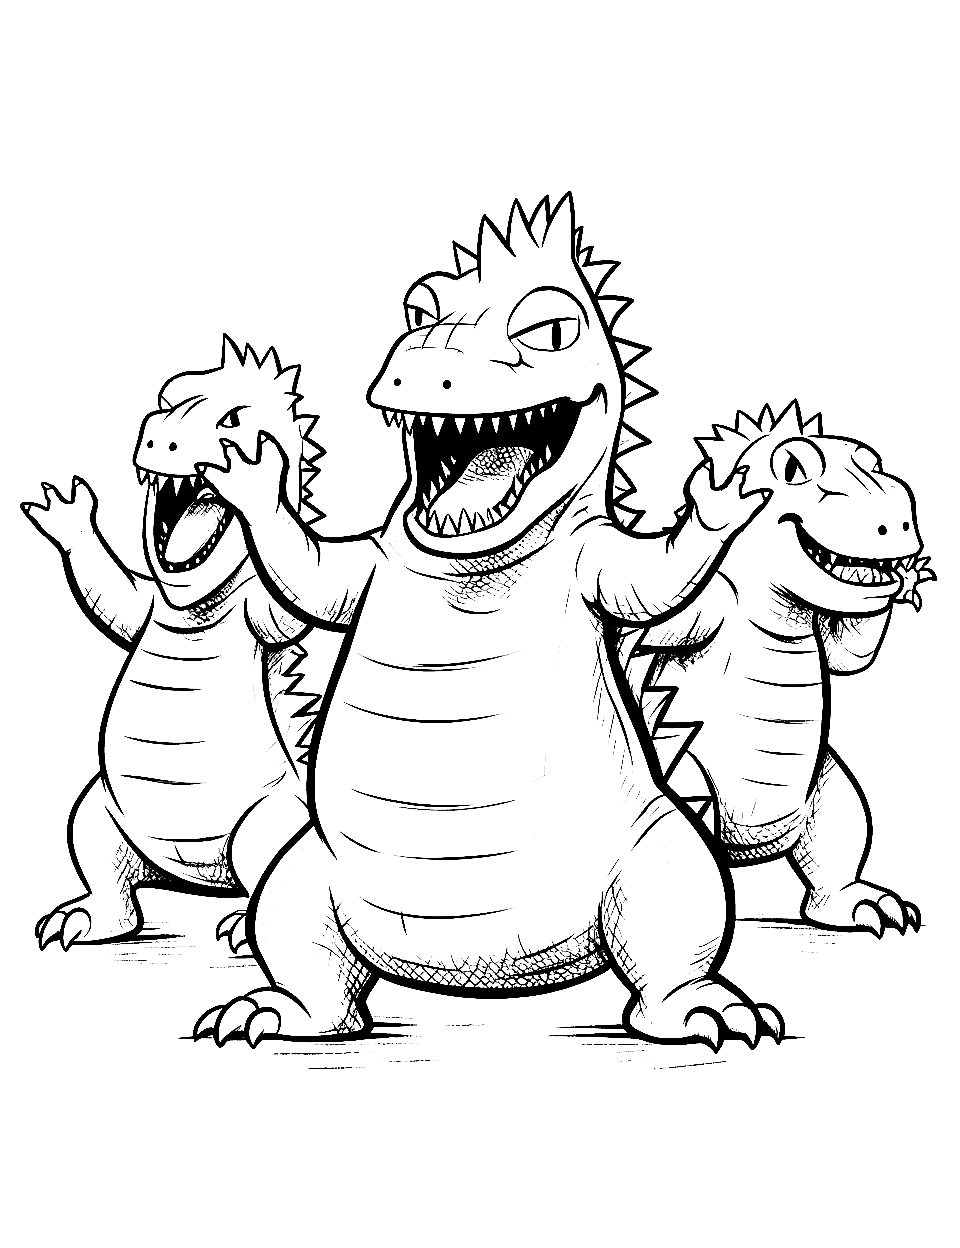 Kaiju Dance Off Coloring Page - Silly poses of kaiju, as if they are dancing.